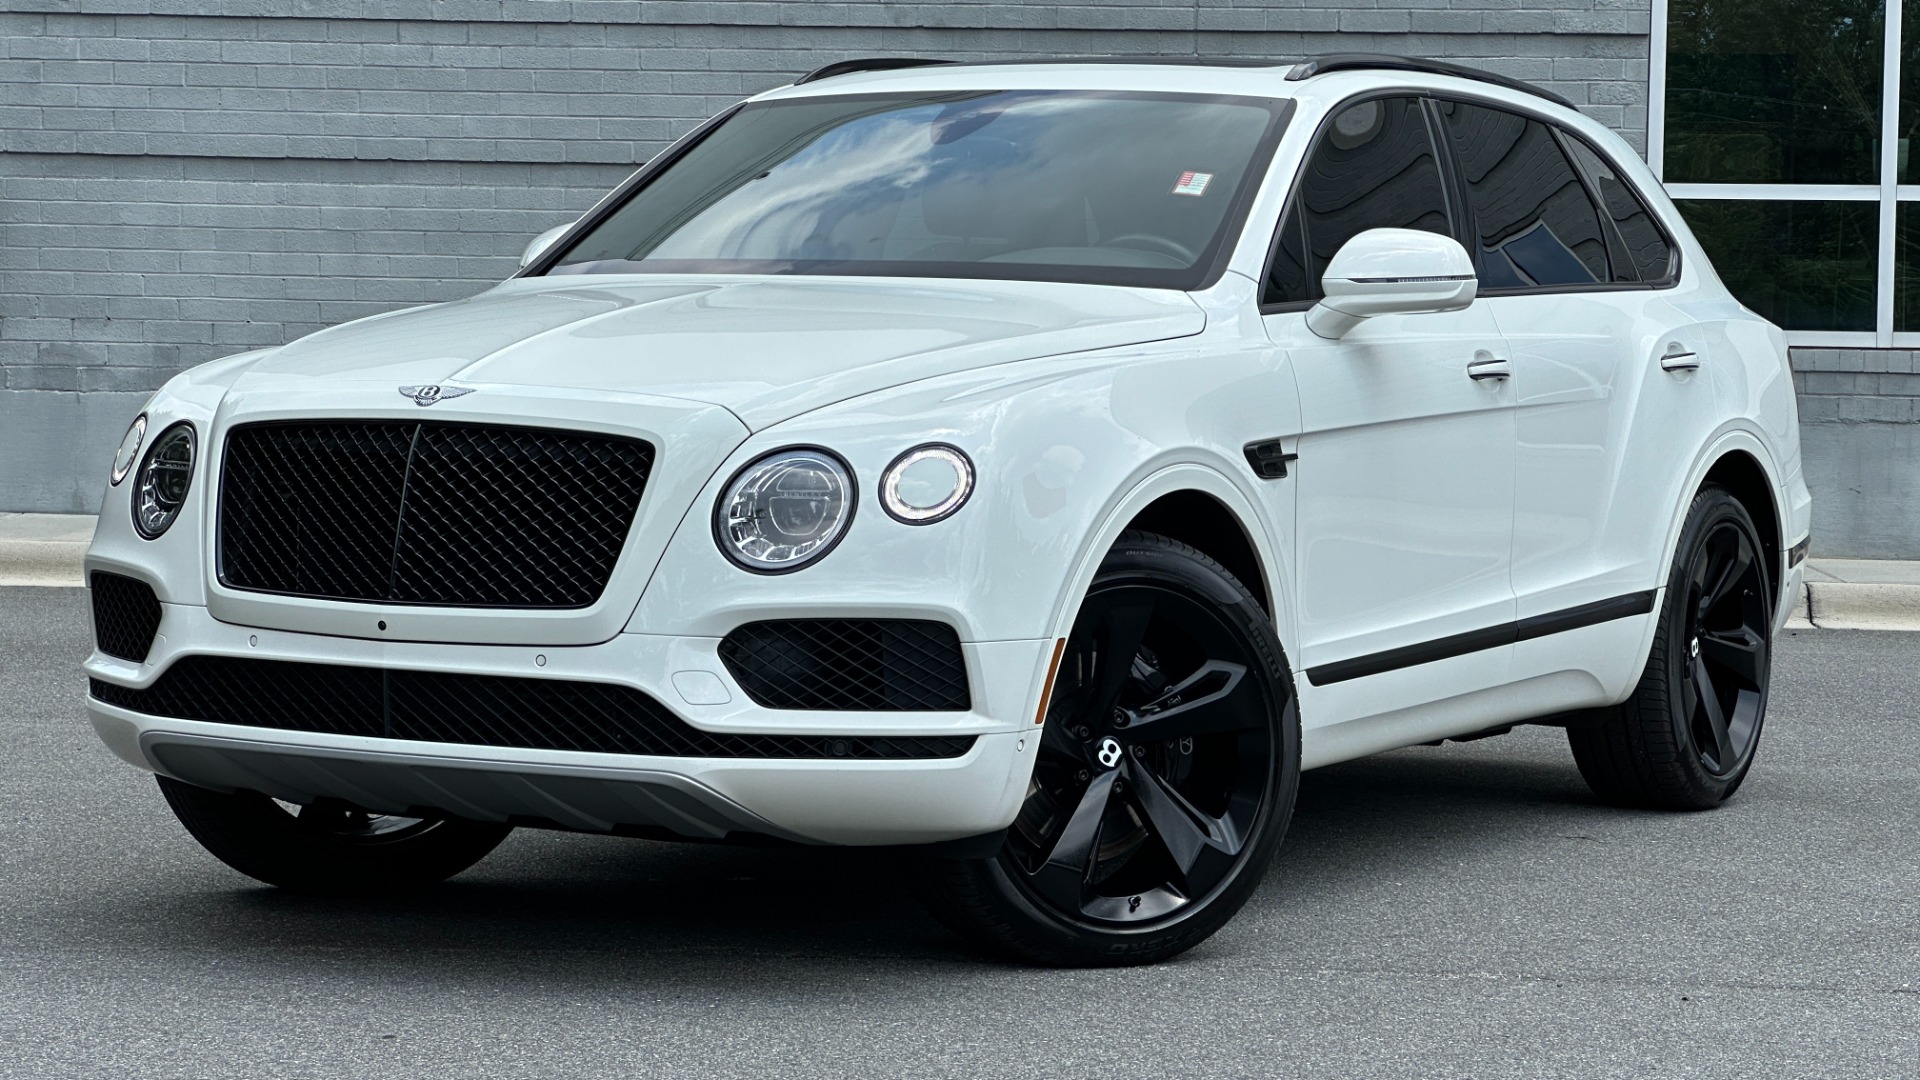 Used 2019 Bentley Bentayga V8 / BLACKOUT / BLACK WHEELS / PIANO TRIM / BENTLEY CLOCK for sale Sold at Formula Imports in Charlotte NC 28227 1